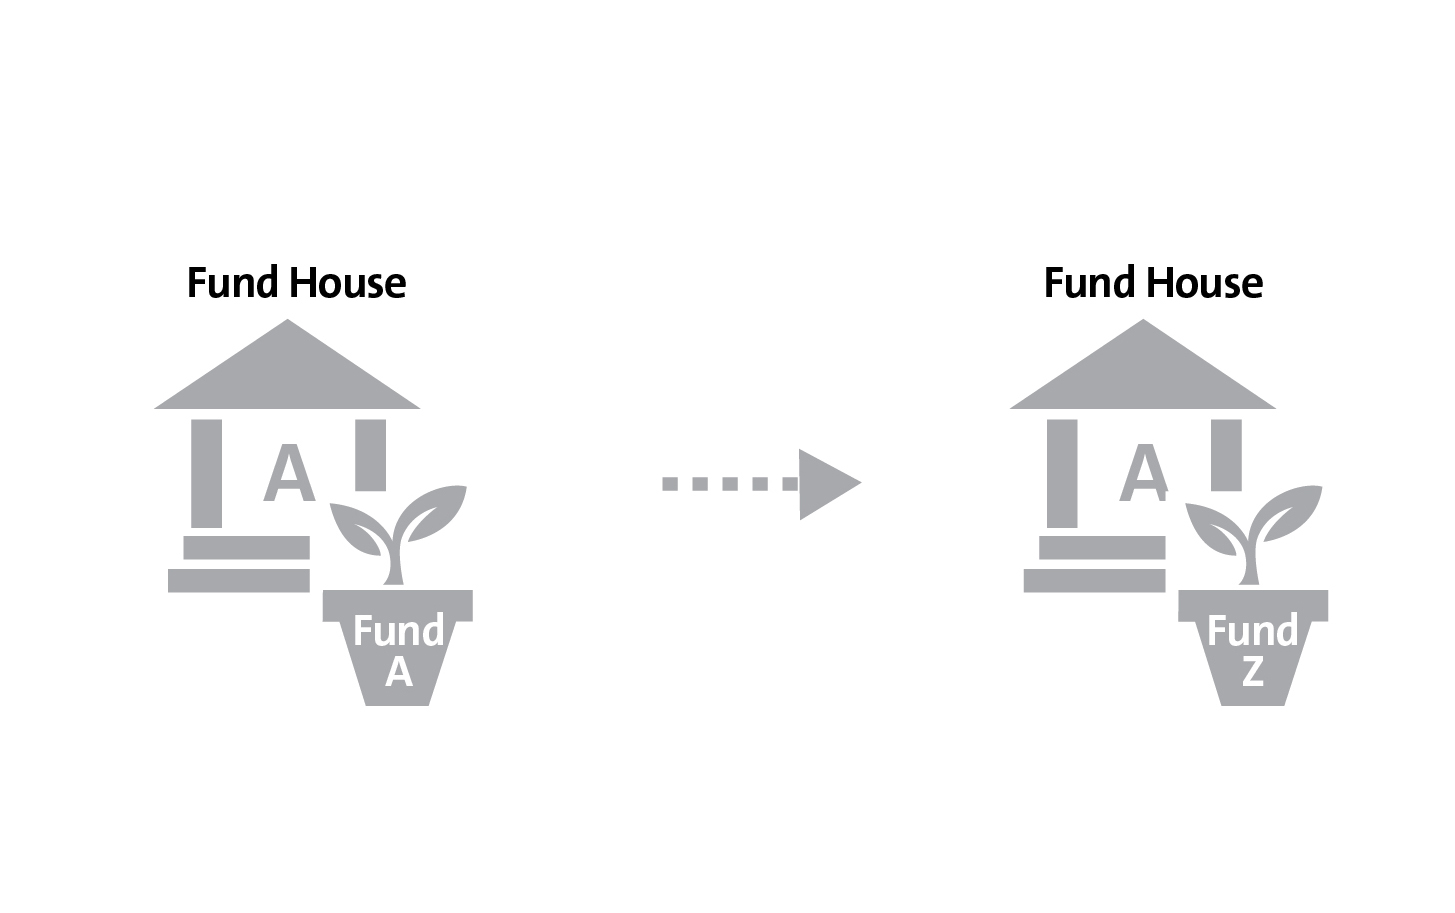 Switch fund A to fund Z within the same fund house